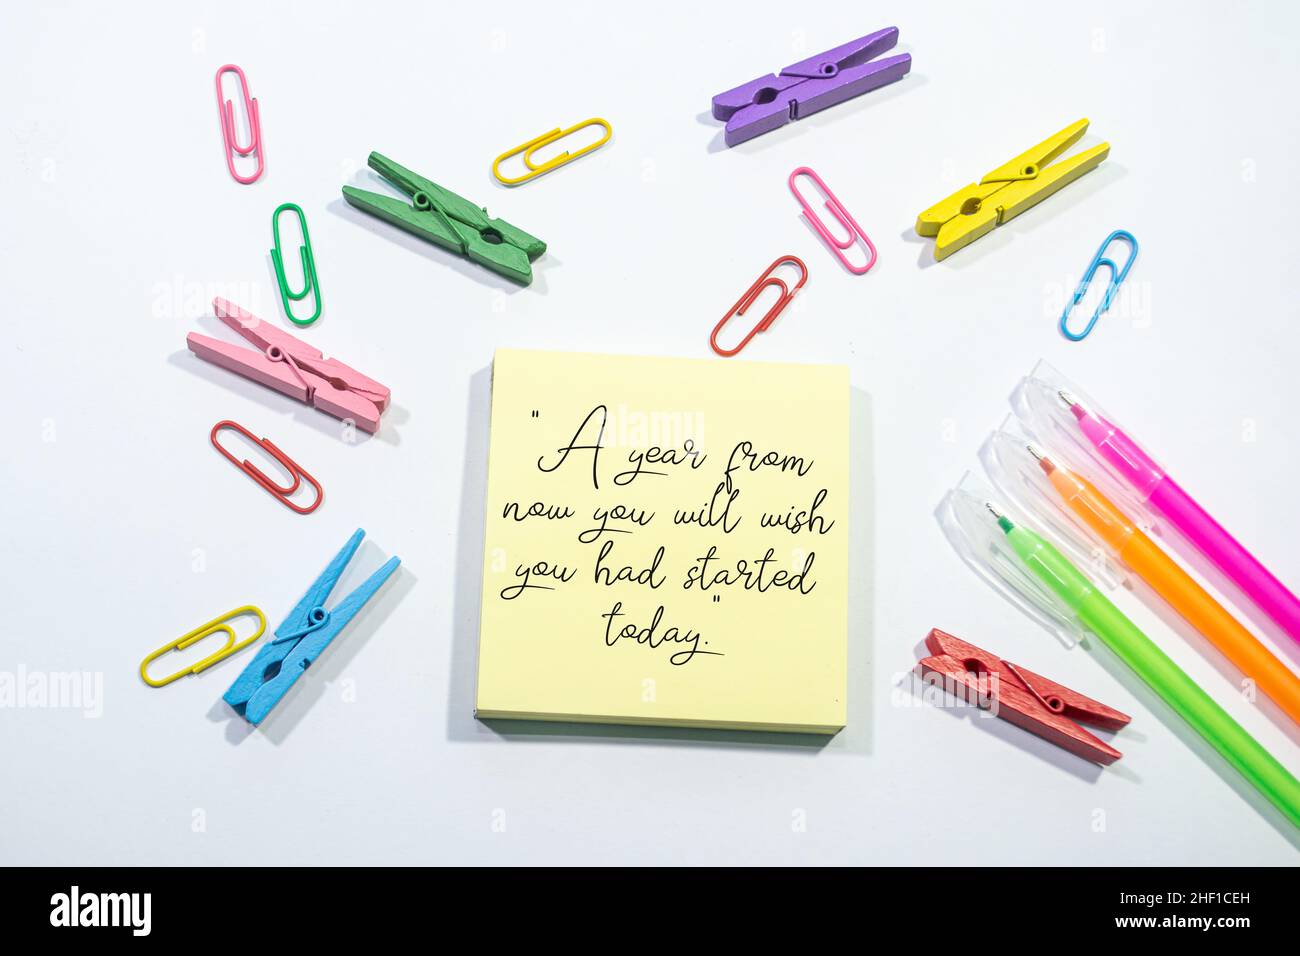 A year from now you will wish you had started today Motivational quote on Set of colorful paper clips with white copy space background. Stock Photo